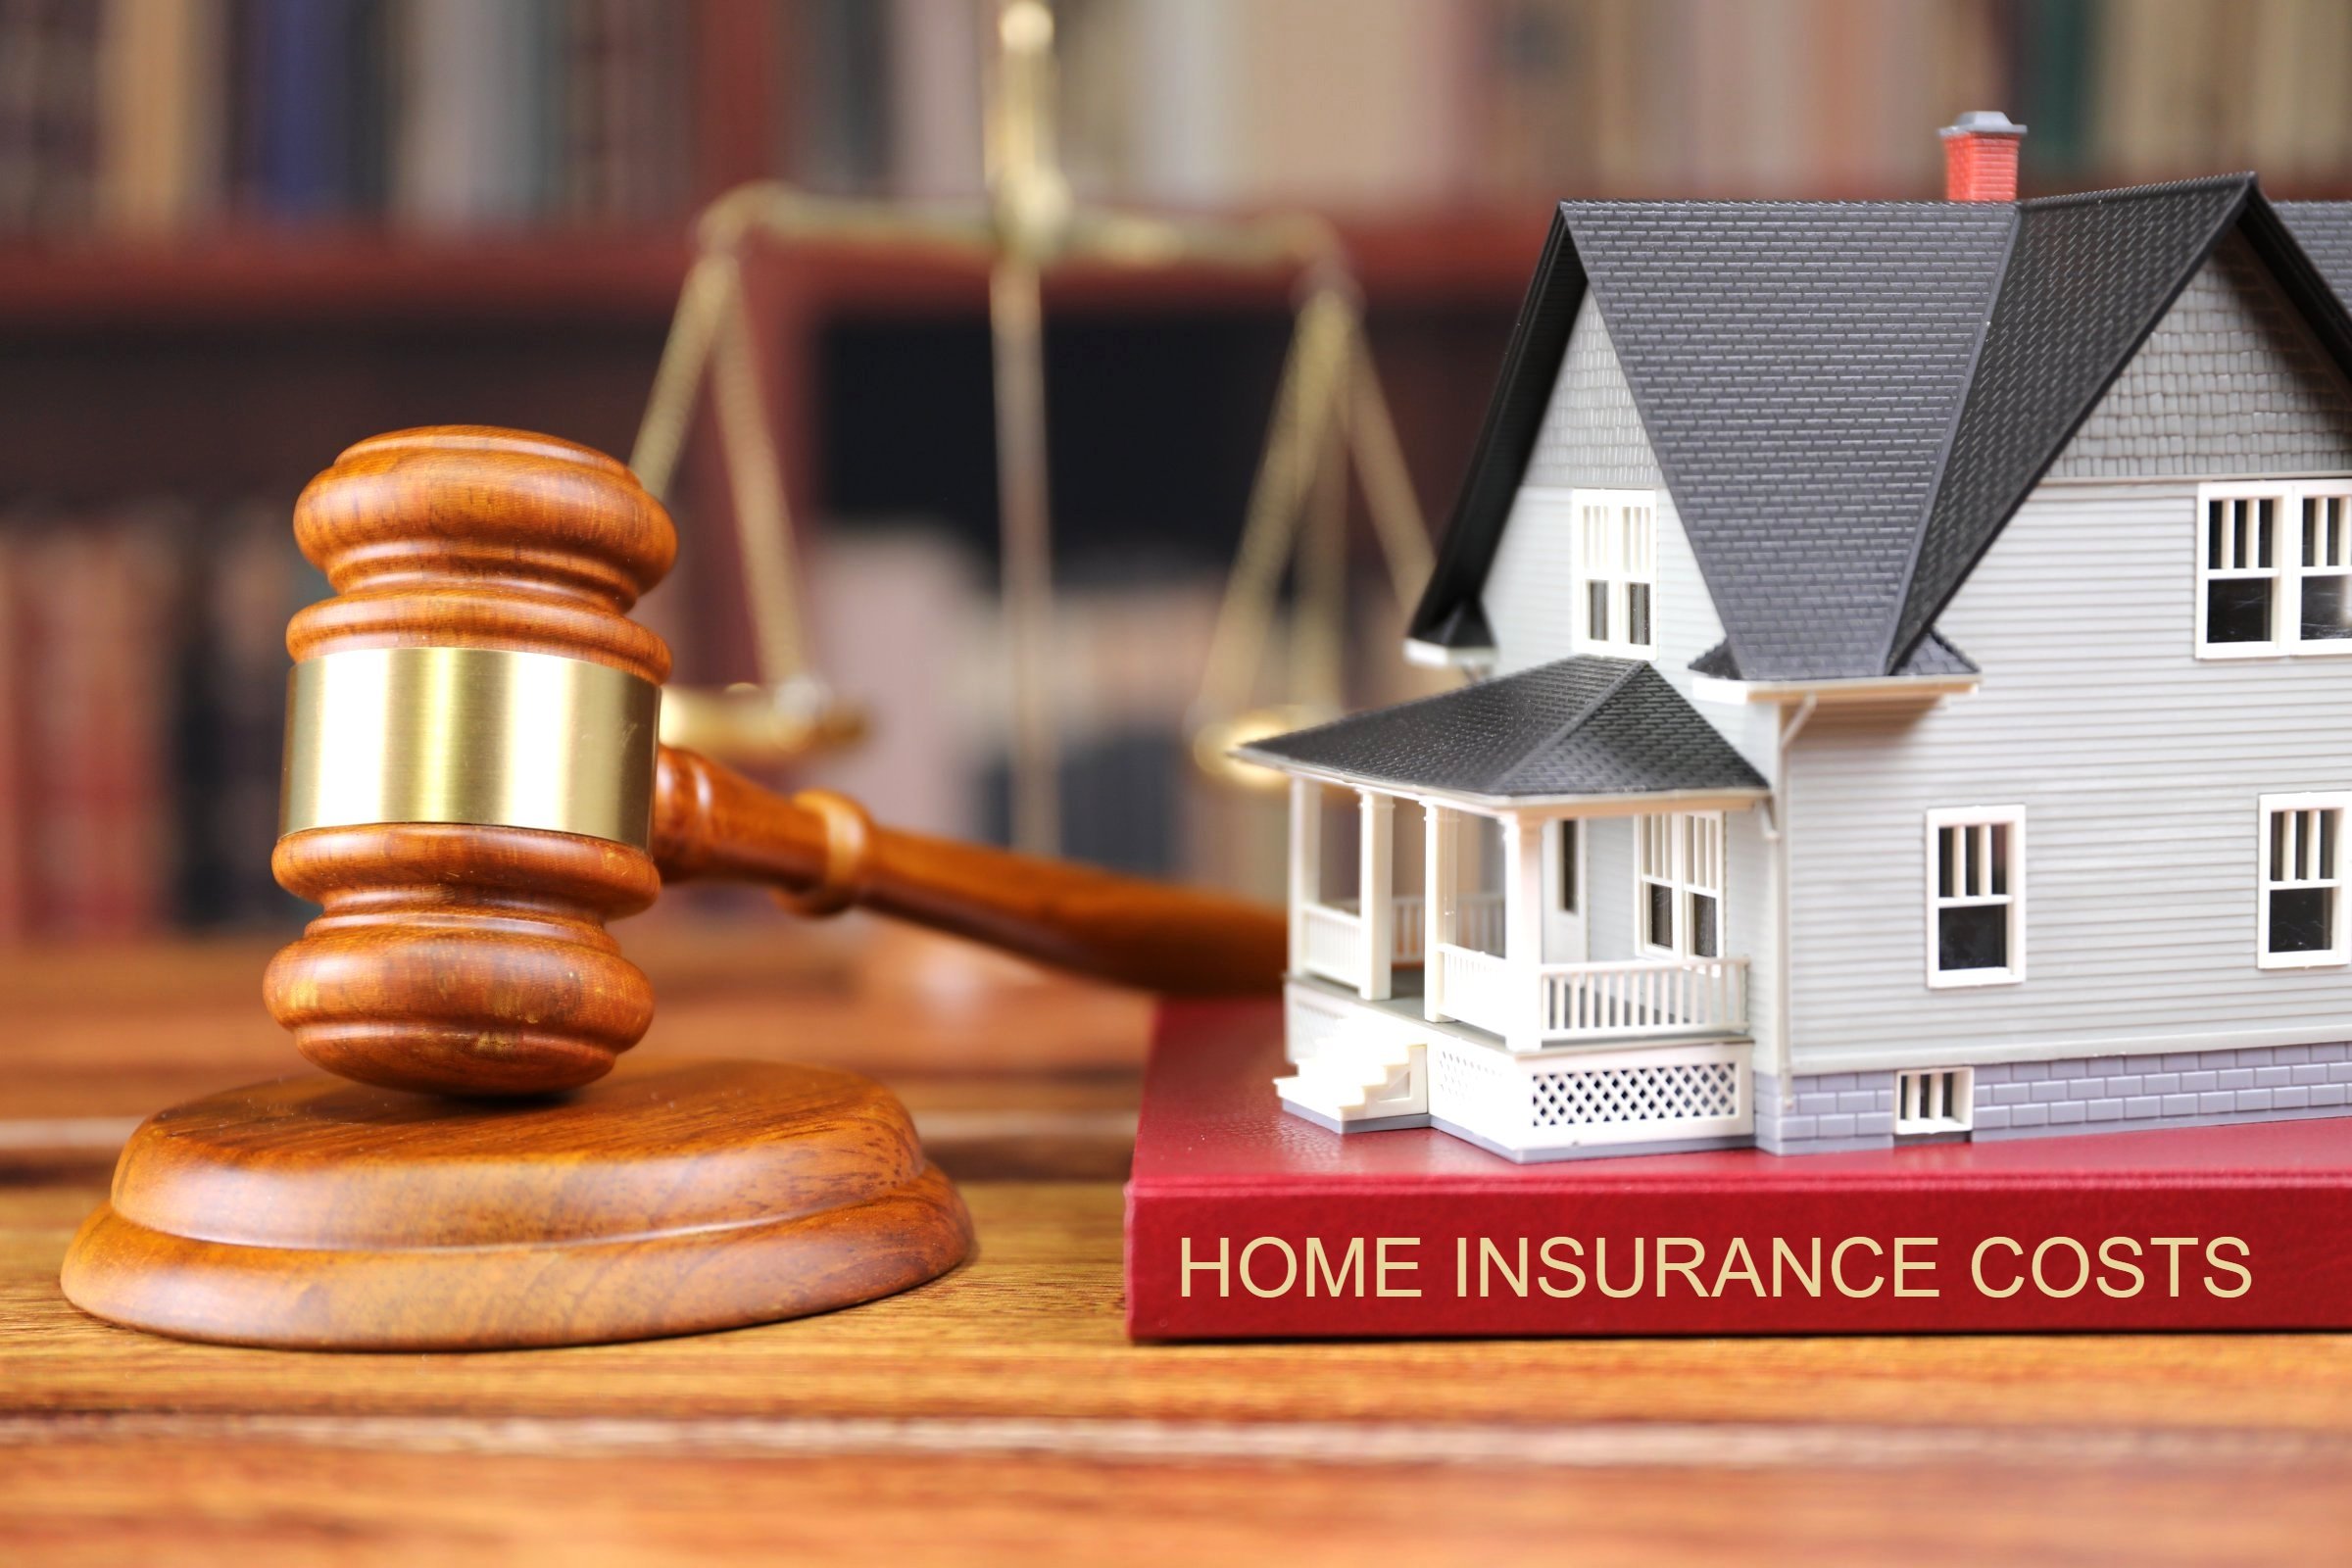 Home Insurance Costs